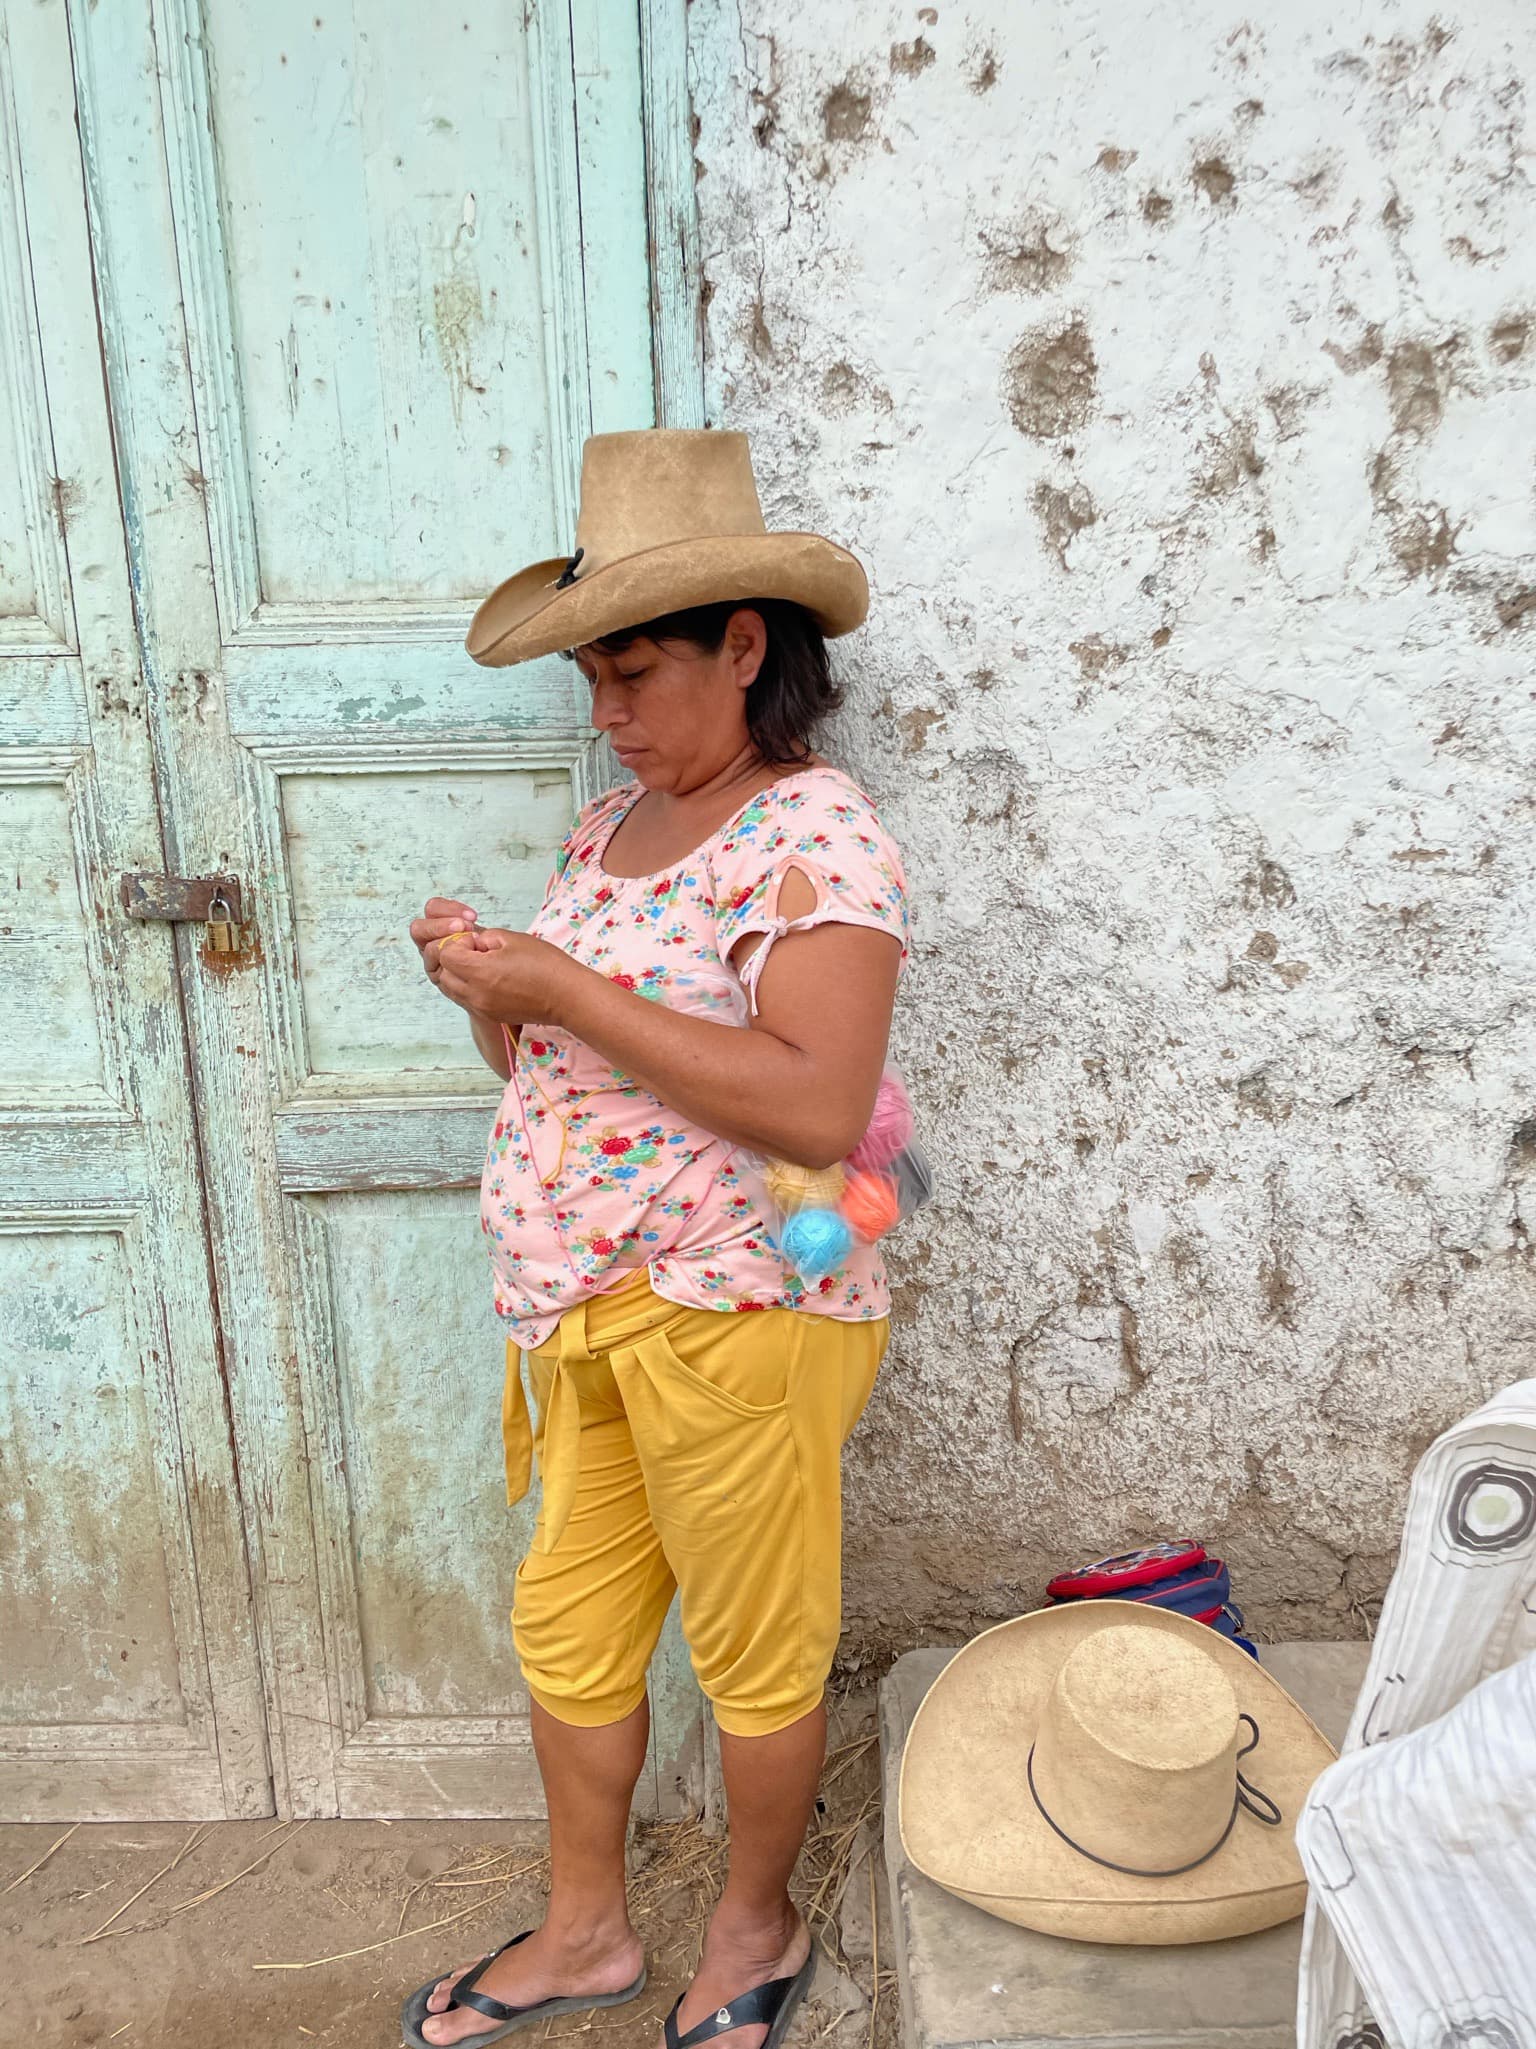 A woman wearing a traditional hat while weaving a crochet top standing against a pale teal door and concrete wall.  